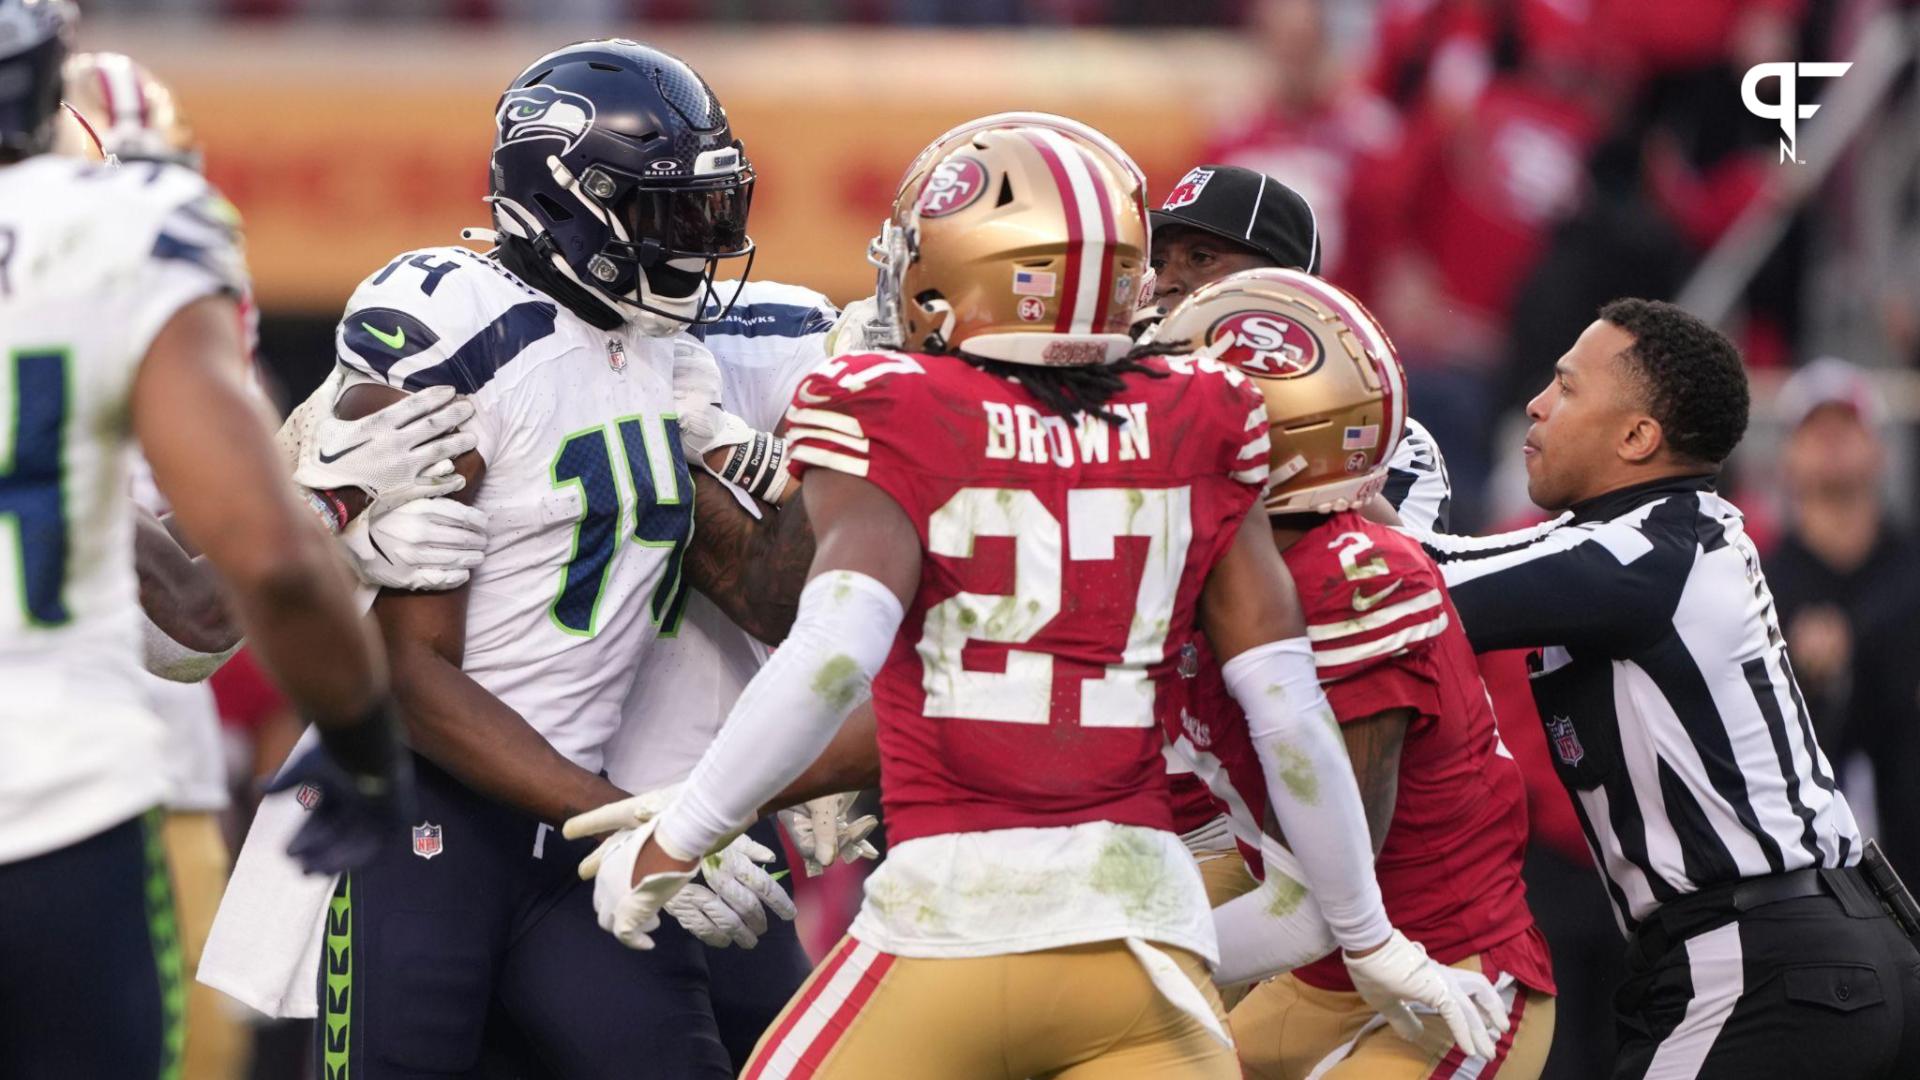 Seattle Seahawks wide receiver DK Metcalf (14) faces off against San Francisco 49ers cornerback Deommodore Lenoir (2) during the fourth quarter at Levi's Stadium.